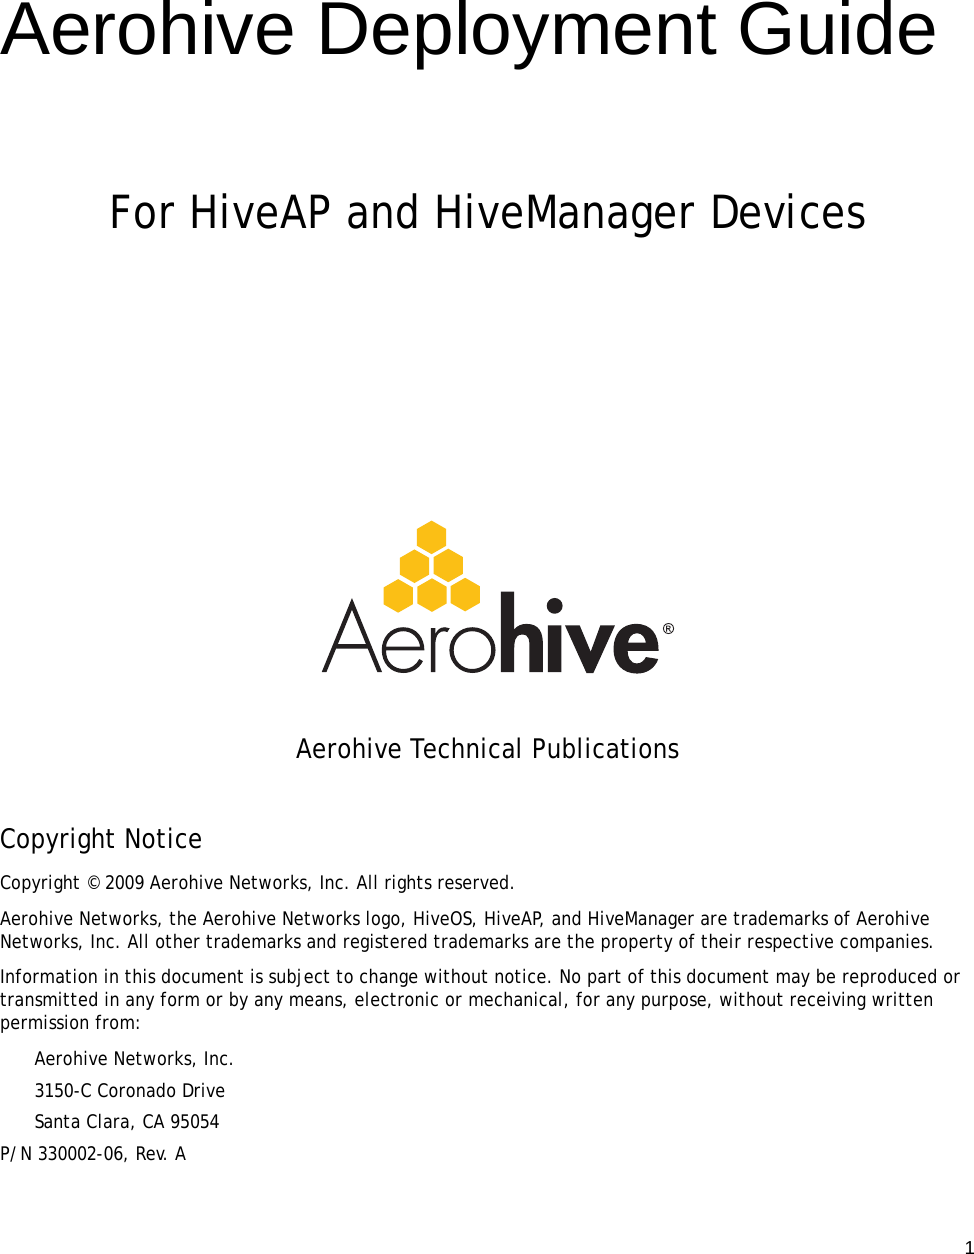 1Aerohive Deployment GuideFor HiveAP and HiveManager DevicesAerohive Technical PublicationsCopyright NoticeCopyright © 2009 Aerohive Networks, Inc. All rights reserved.Aerohive Networks, the Aerohive Networks logo, HiveOS, HiveAP, and HiveManager are trademarks of Aerohive Networks, Inc. All other trademarks and registered trademarks are the property of their respective companies.Information in this document is subject to change without notice. No part of this document may be reproduced or transmitted in any form or by any means, electronic or mechanical, for any purpose, without receiving written permission from:Aerohive Networks, Inc.3150-C Coronado DriveSanta Clara, CA 95054P/N 330002-06, Rev. A